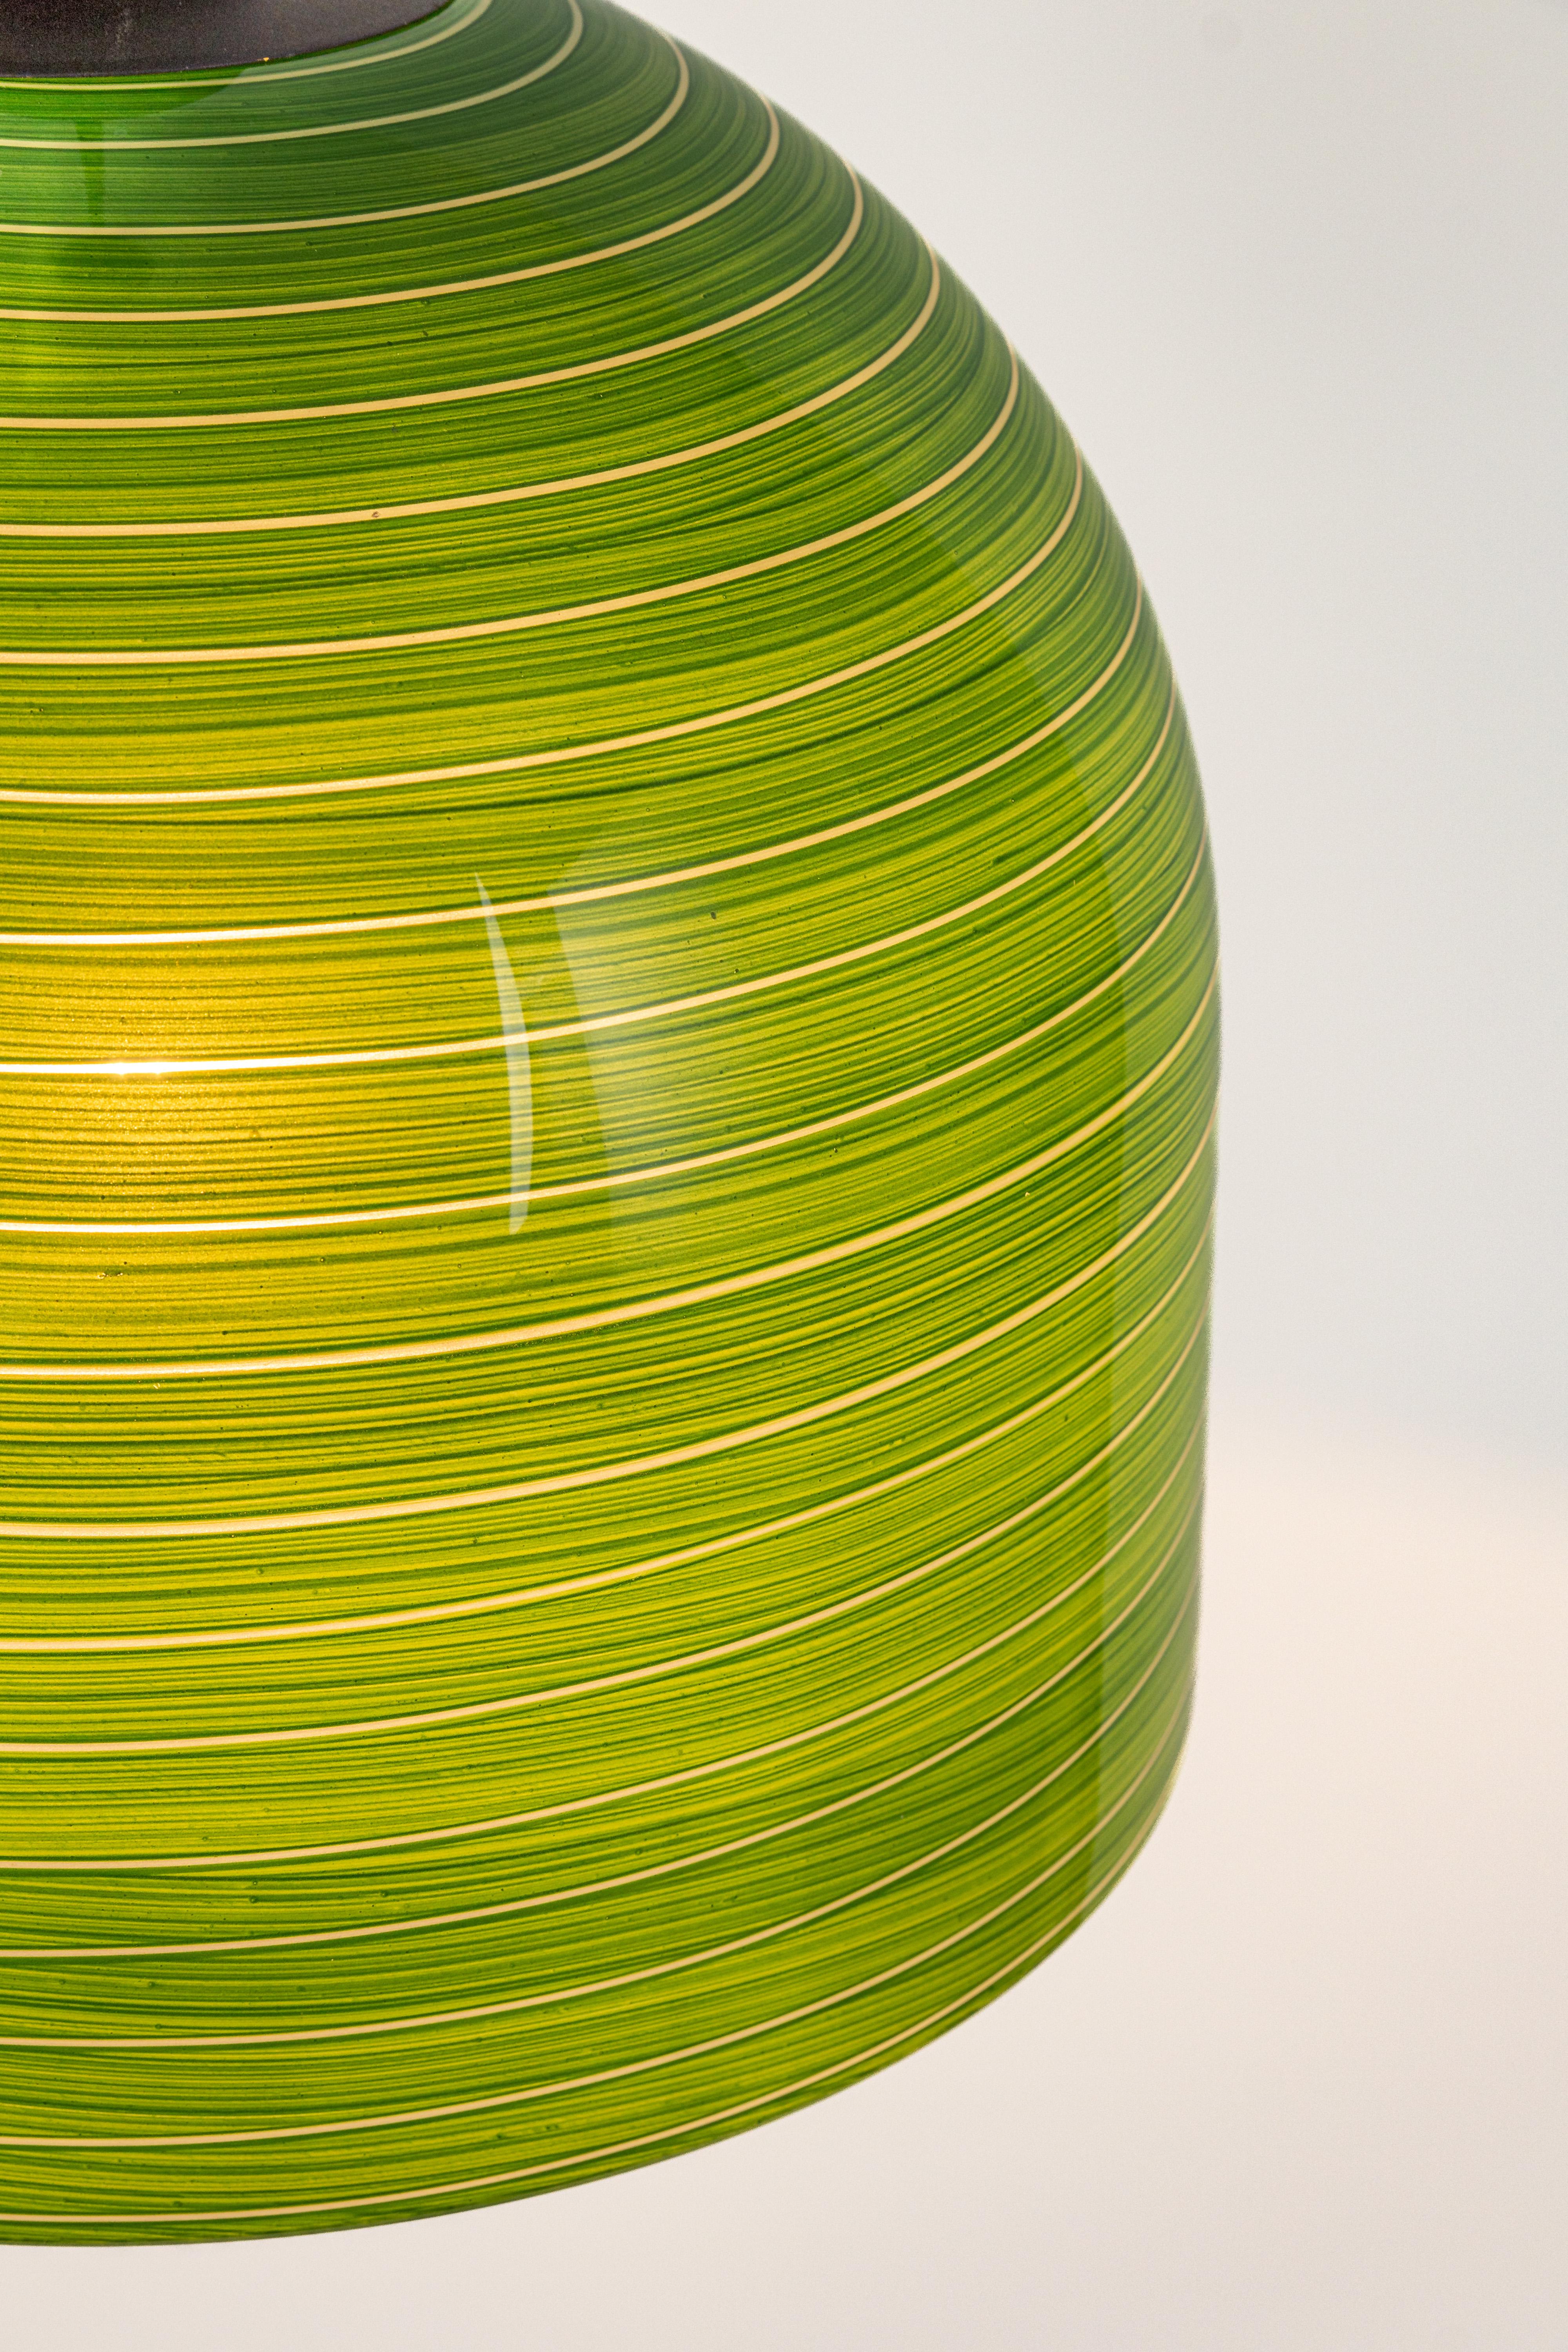 1 of 5 Green Glass Pendant Light by Peill Putzler, Germany, 1970 For Sale 2